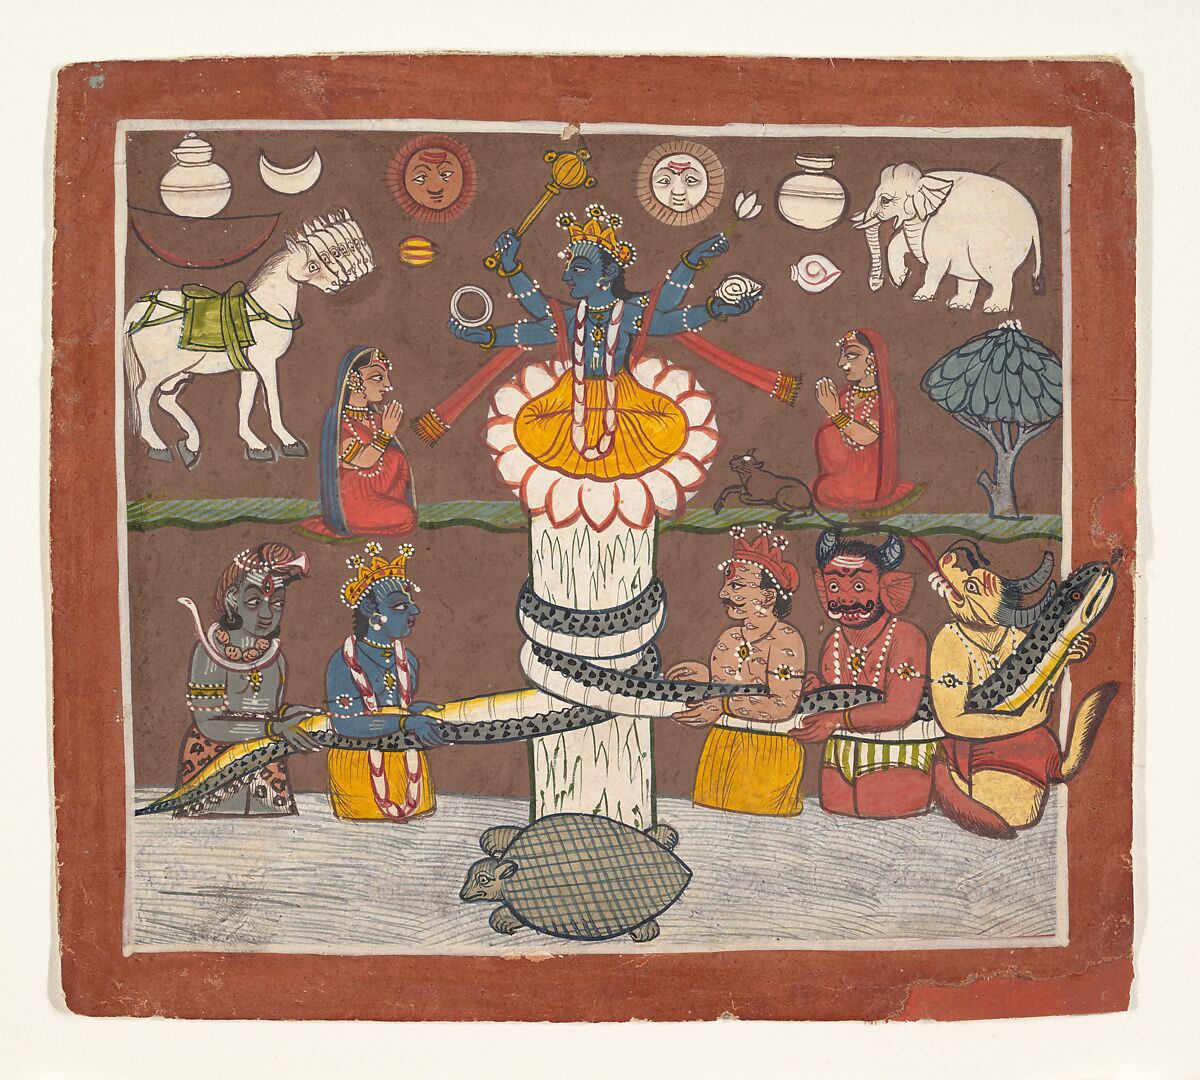 The Churning of the Ocean of Milk, Ink and opaque watercolor on paper, India (Punjab Hill, Mandi) 